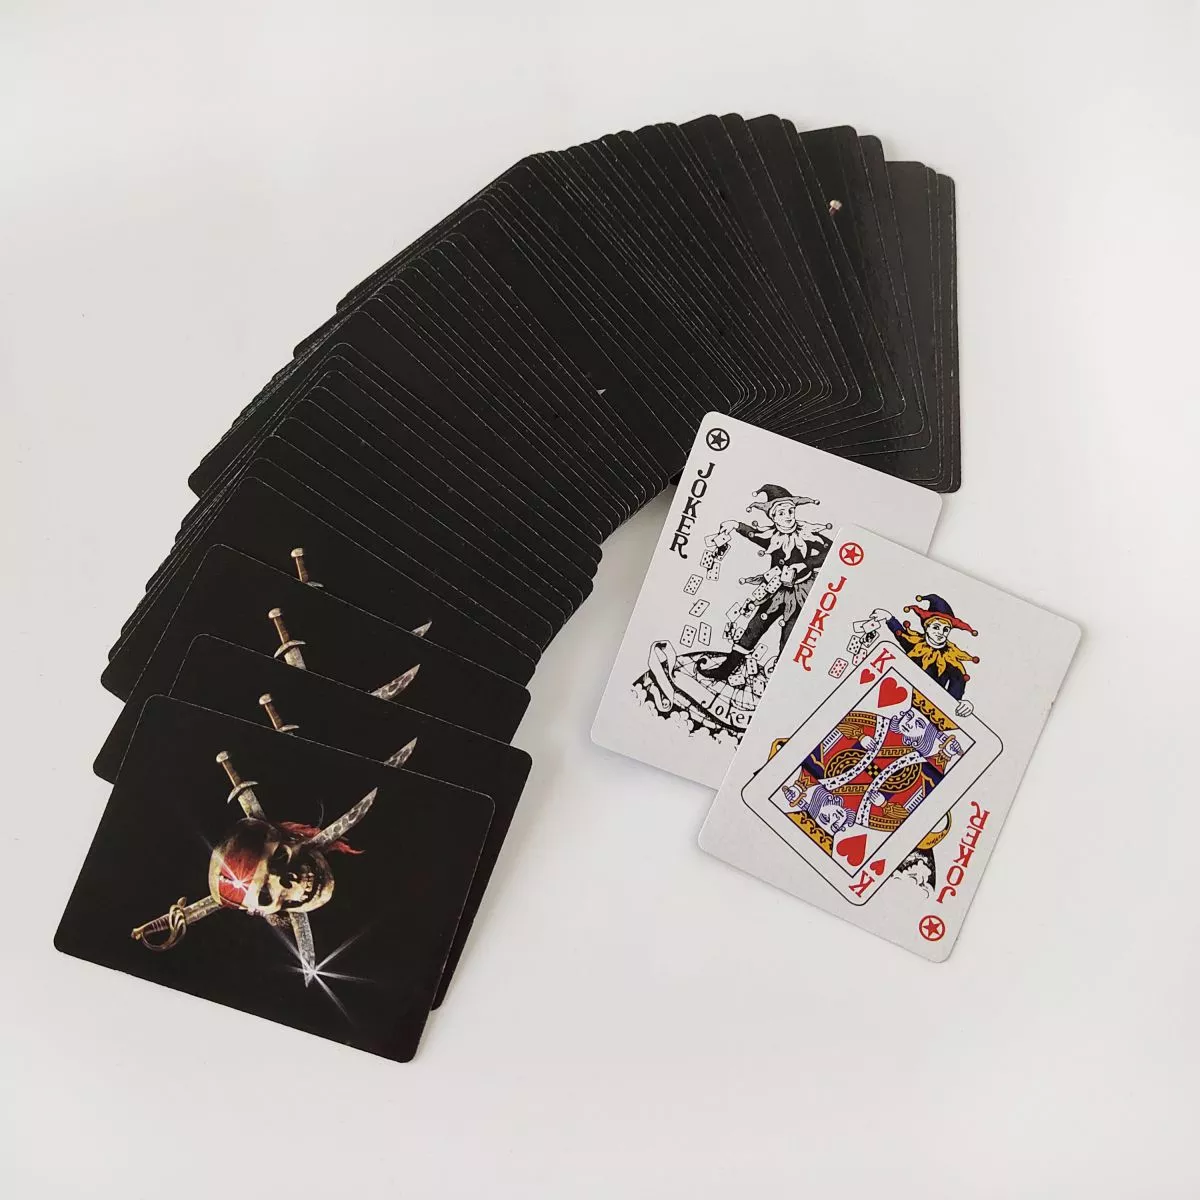 PP010 Card Game